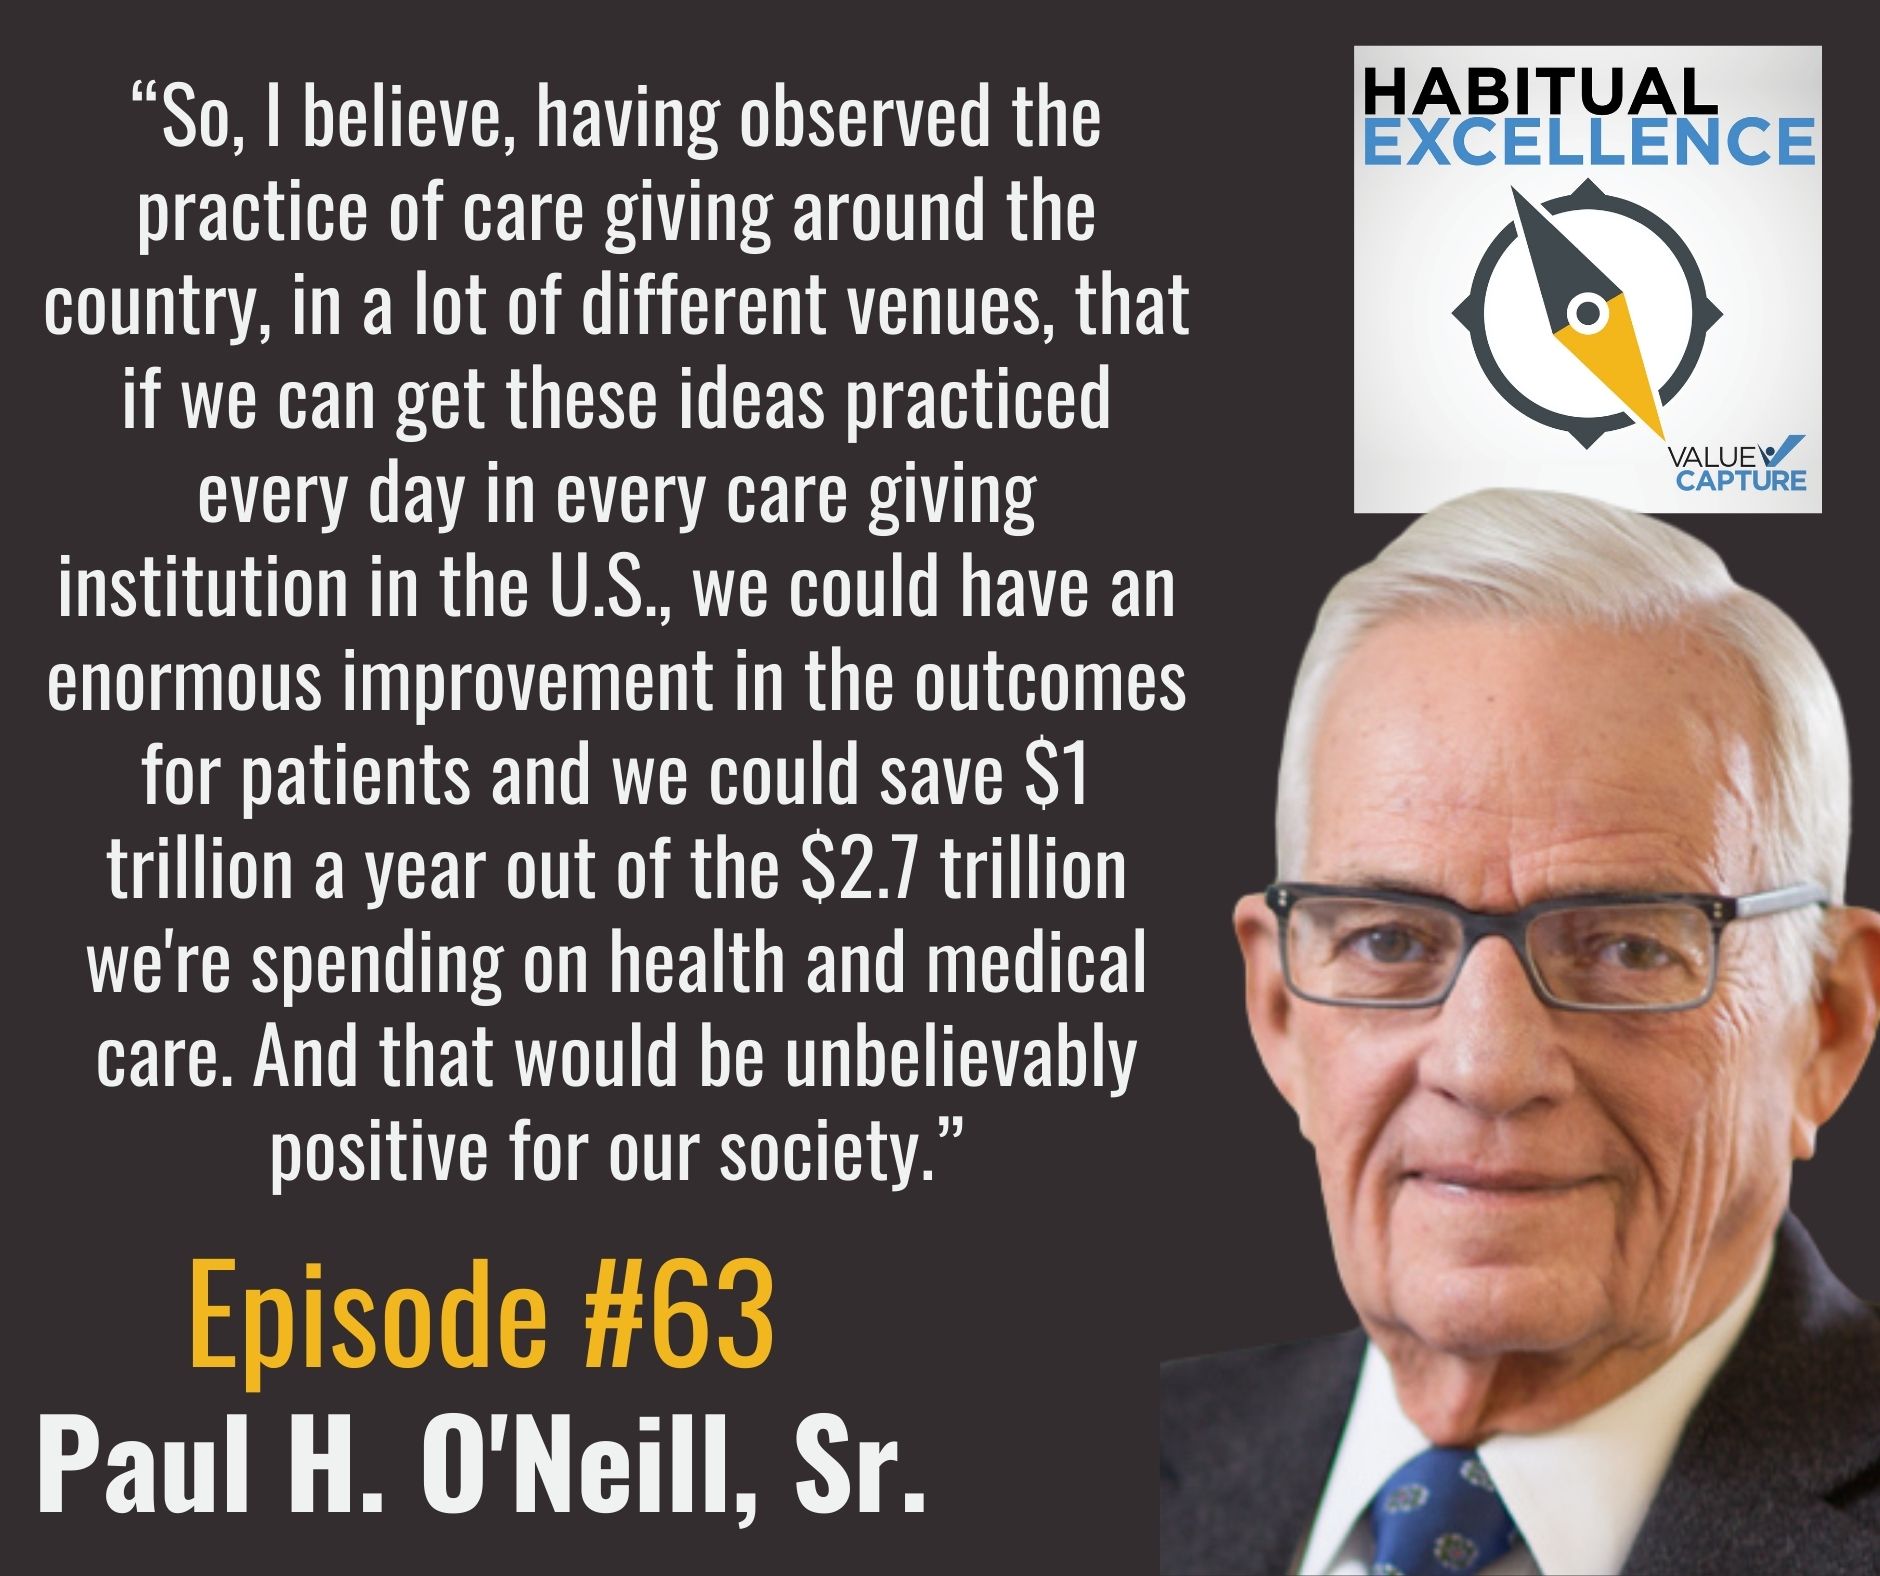 Paul H. O'Neill Sr.: A Podcast From 2011 on Safety, Leadership, and More